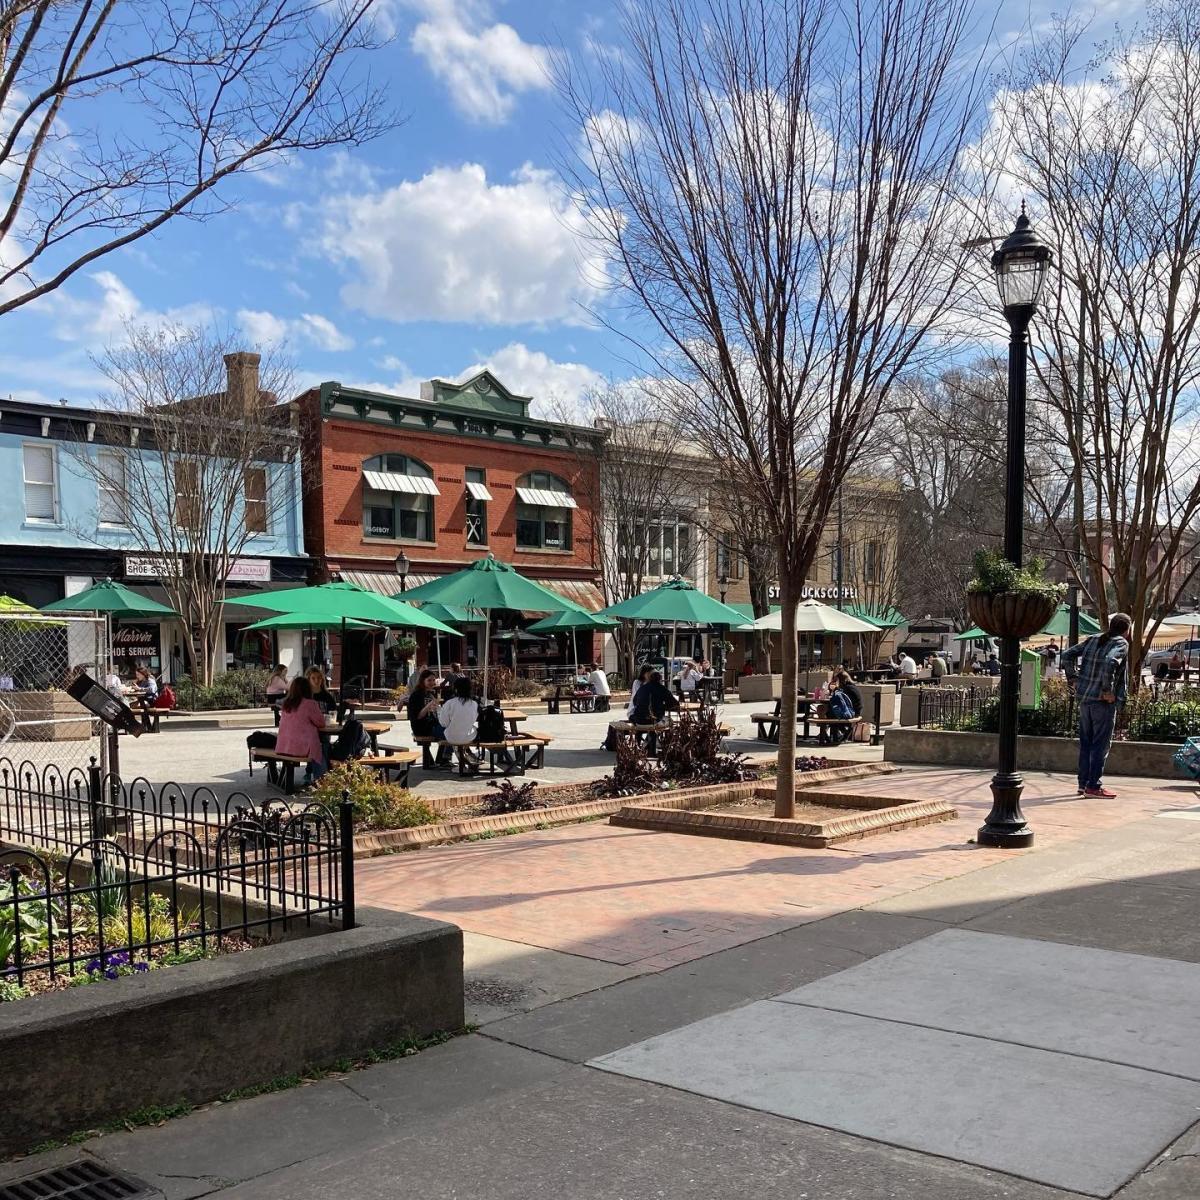 An image of college square (the area of College ave that's closed in for pedestrians only) shows several picnic tables with patrons.